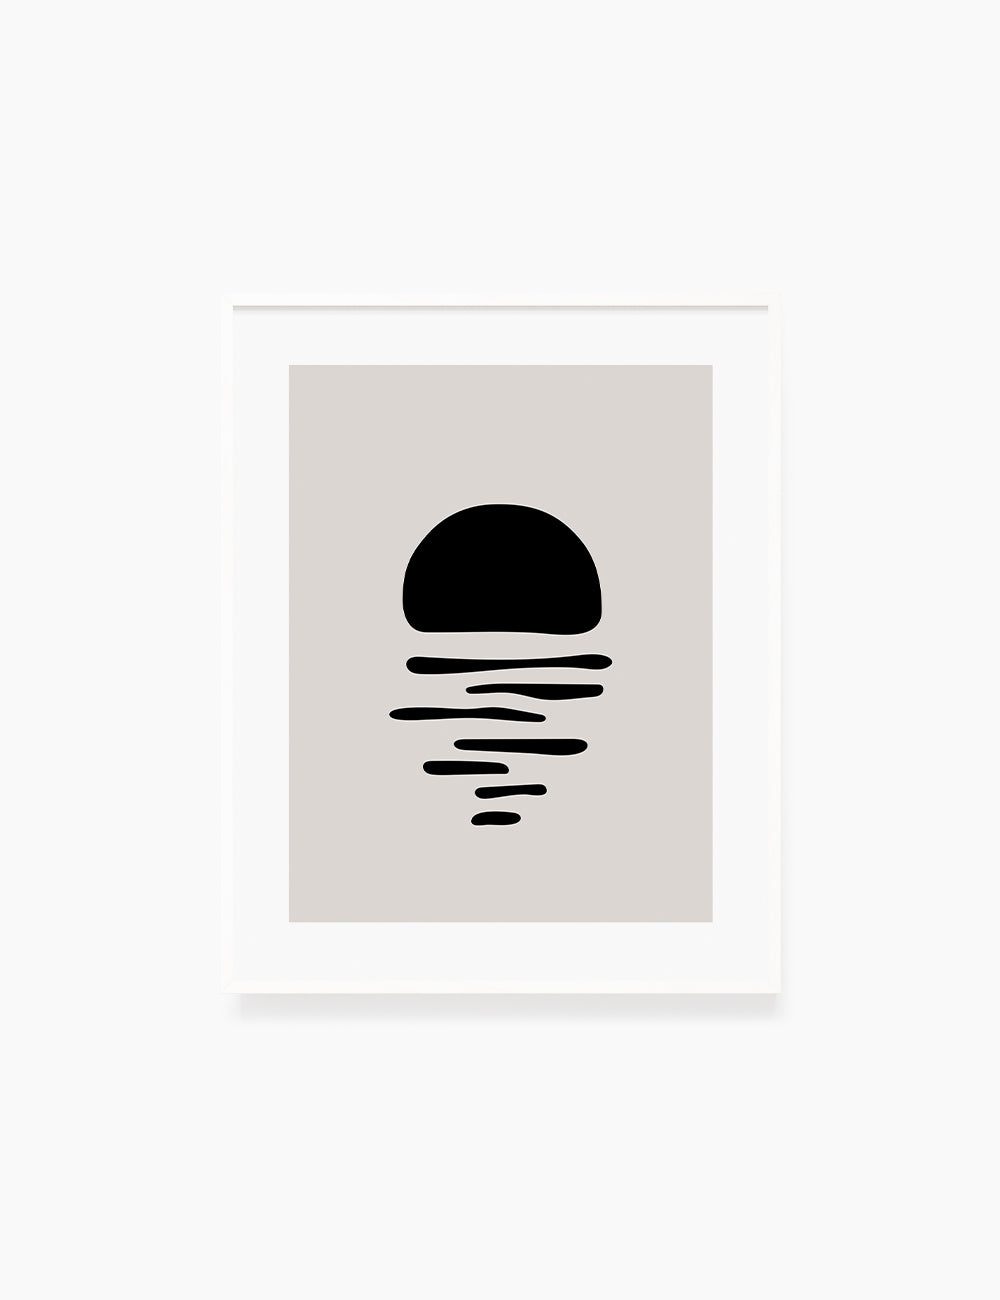 Black and Beige Minimalist Art. Abstract Sun/Moon Reflection on the Water.